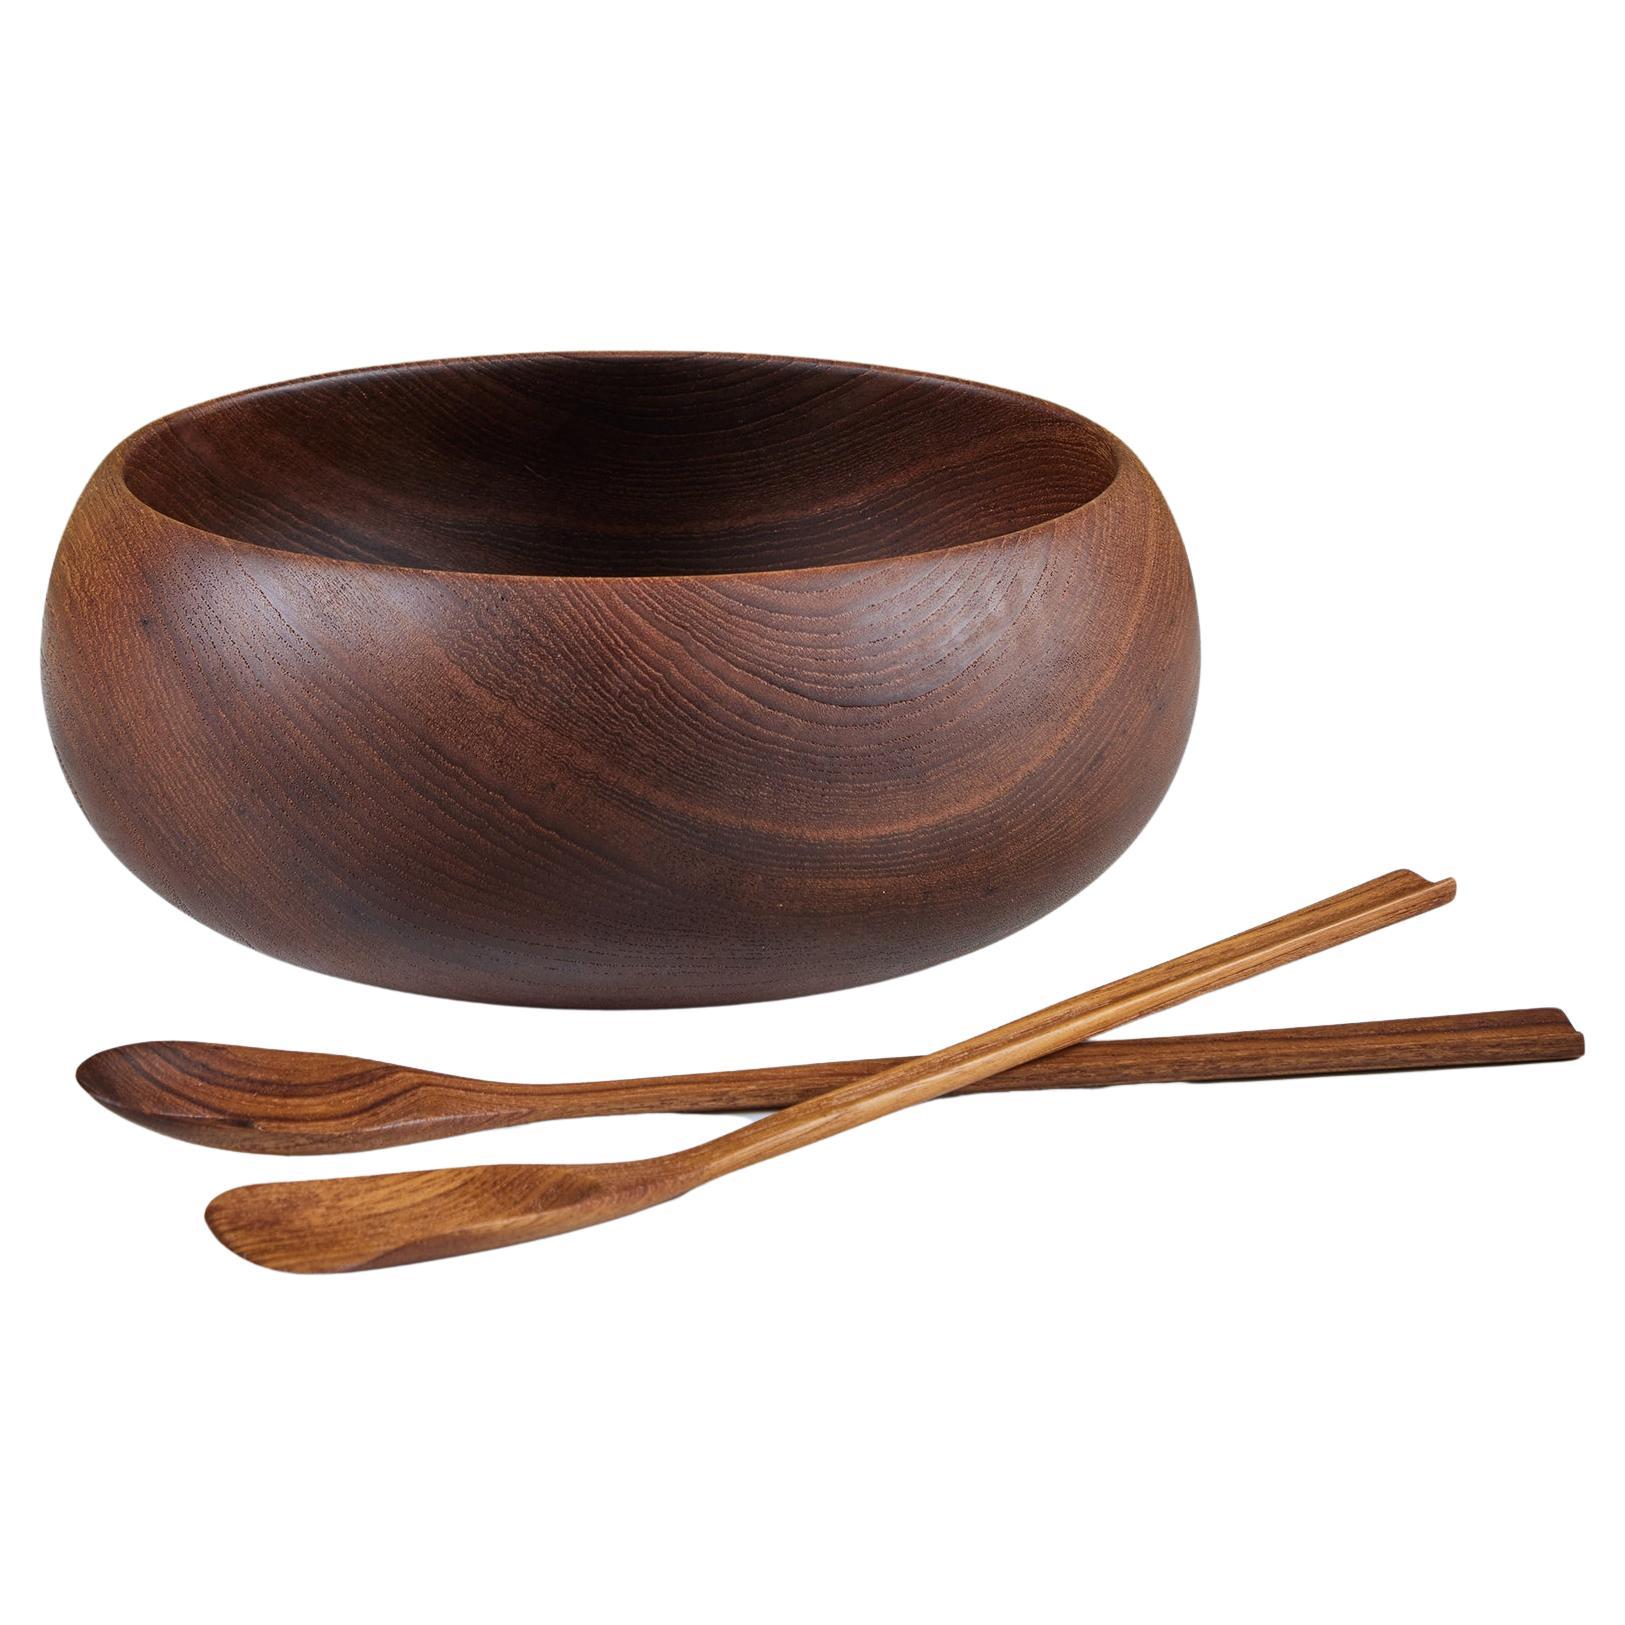 Wood Turned Bowl with Utensils For Sale